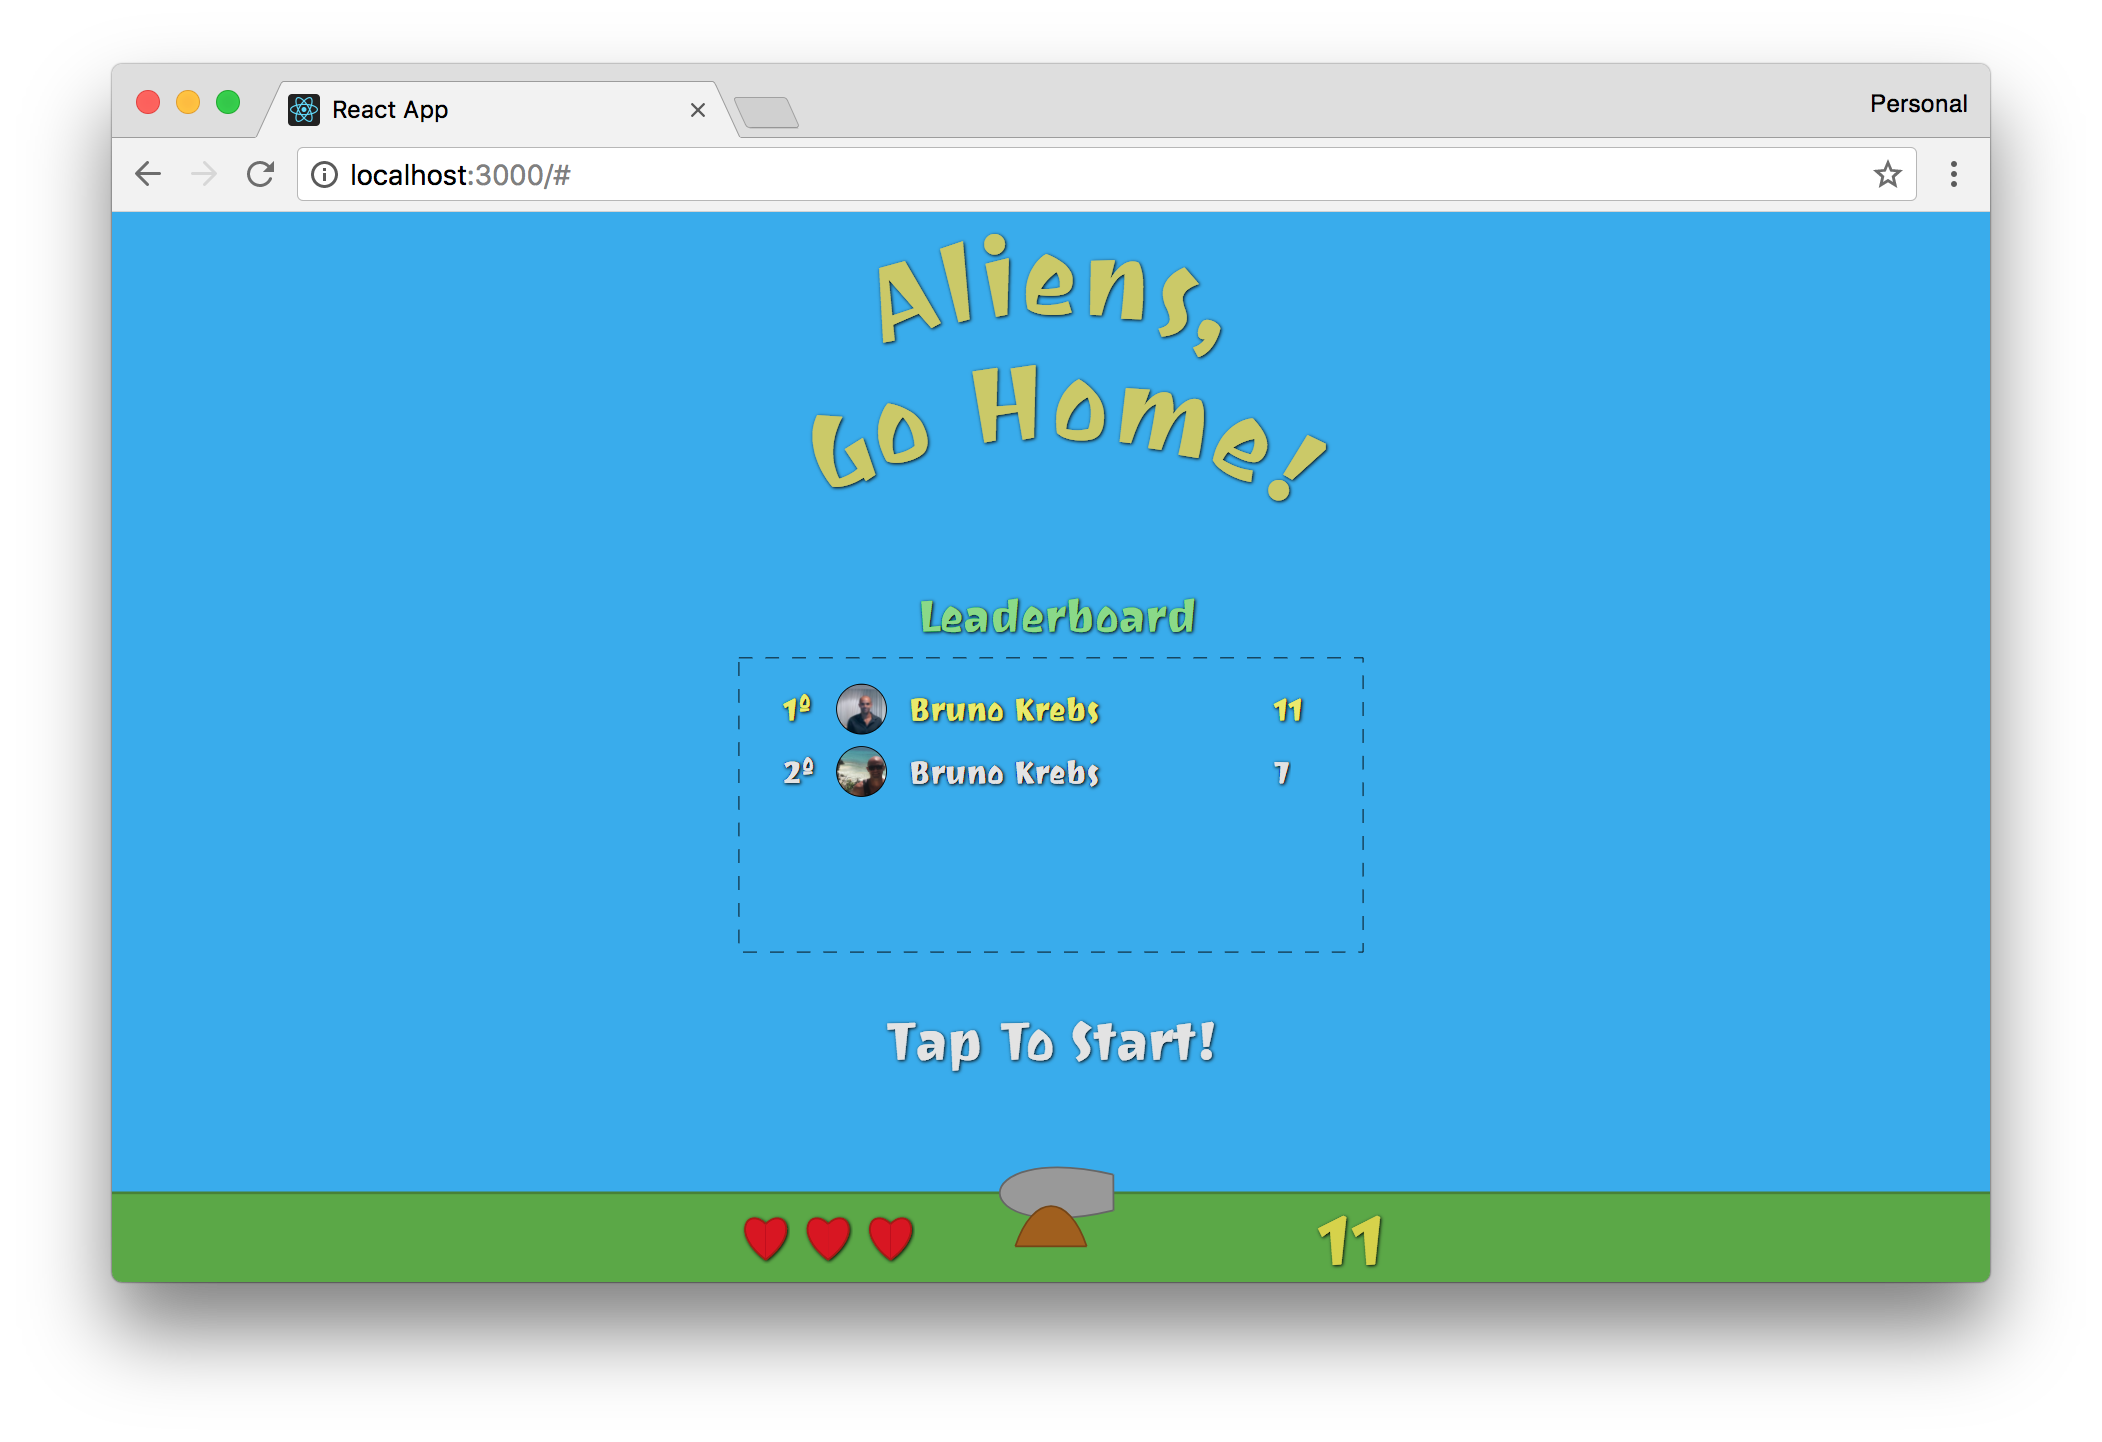 Aliens, Go Home! game completed.